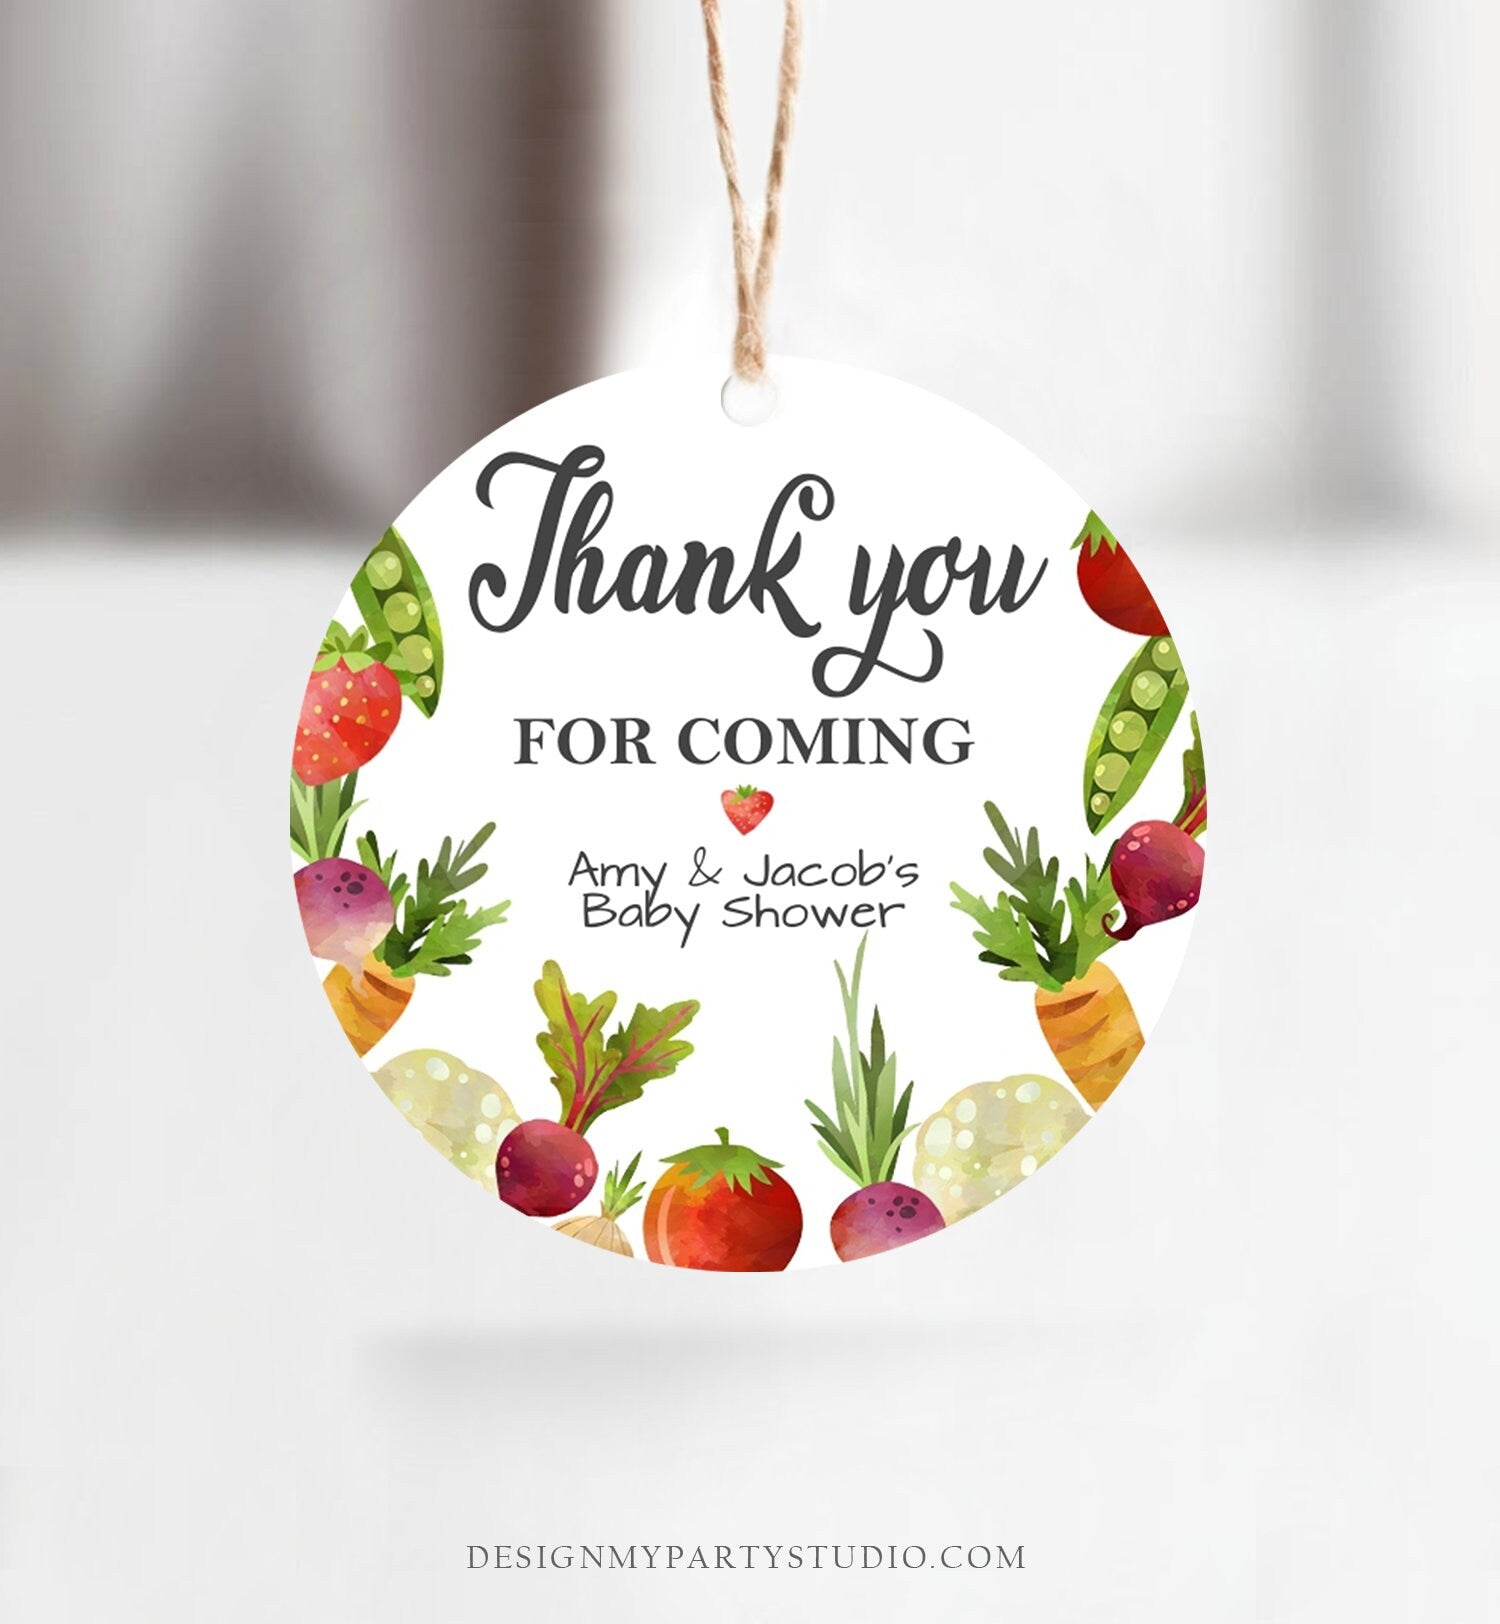 Editable Locally Grown Thank You Tag Birthday Farmers Market Favor Tag Baby Shower Vegetable Veggies Gender Neutral Corjl Template 0144